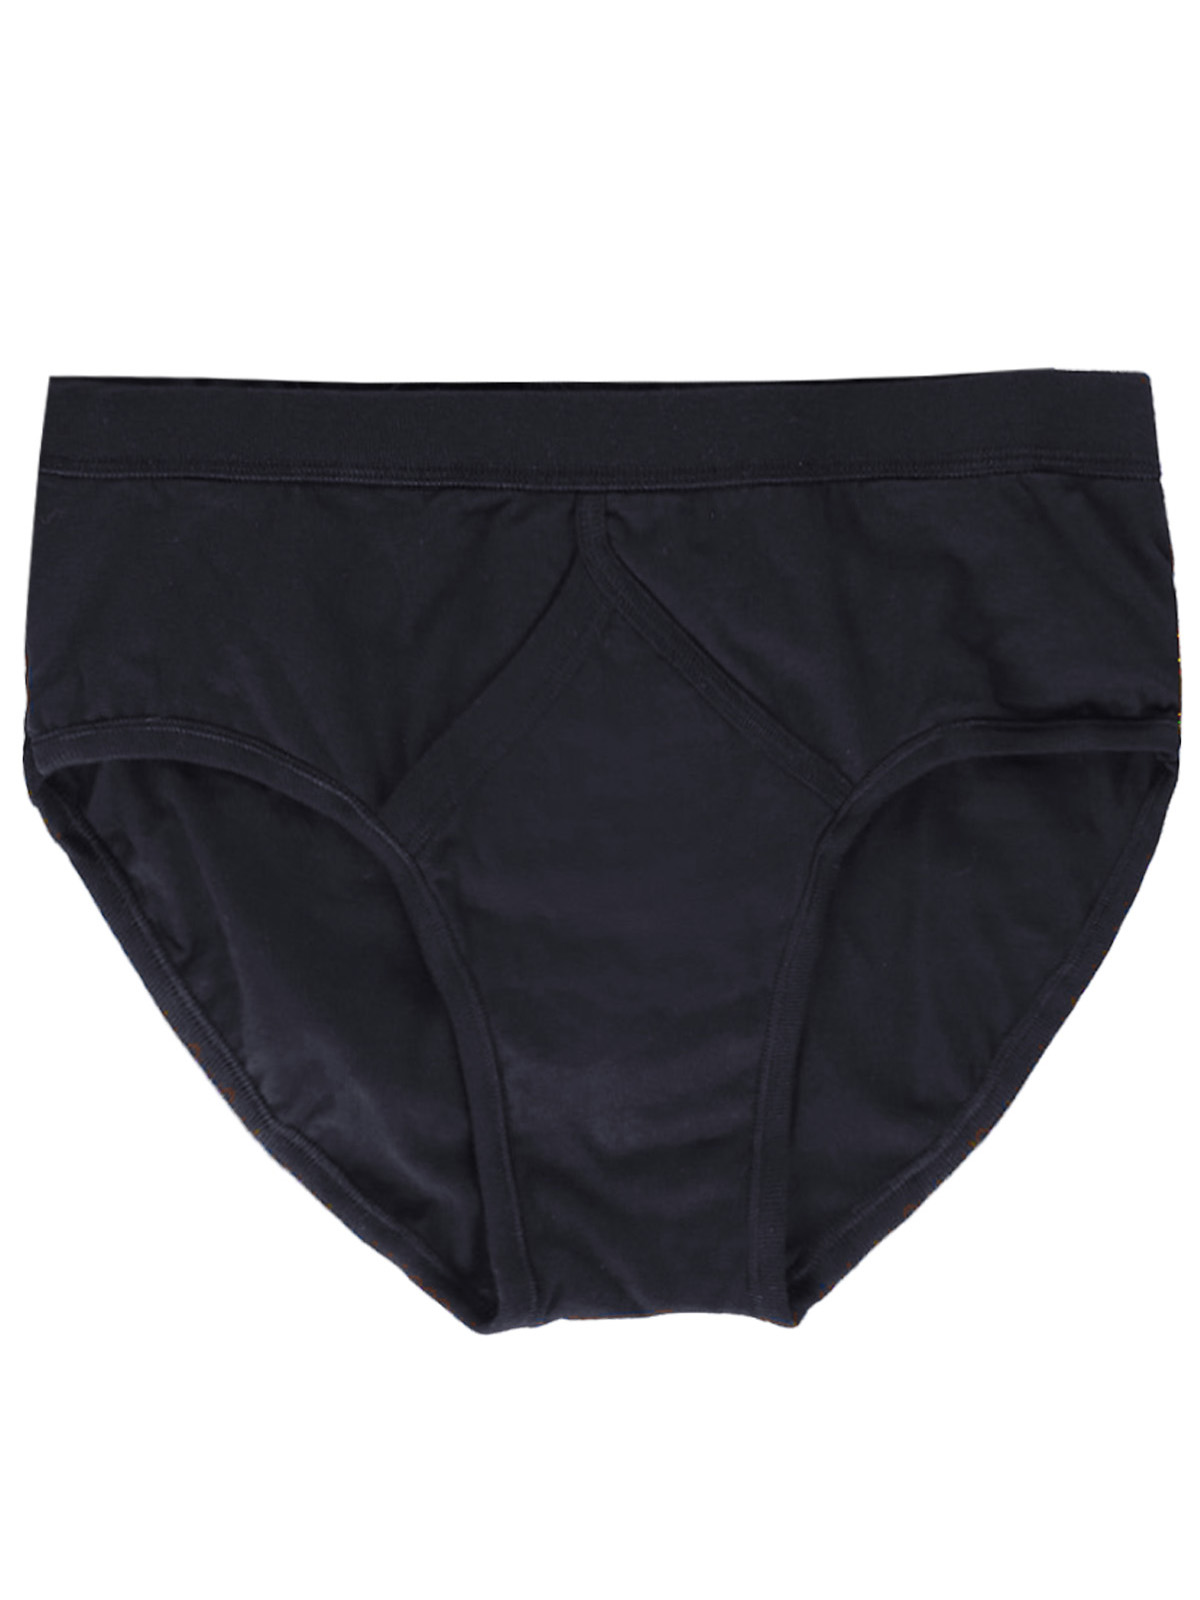 Marks and Spencer - - M&5 BLACK Mens Pure Cotton StayNew Briefs - Size ...